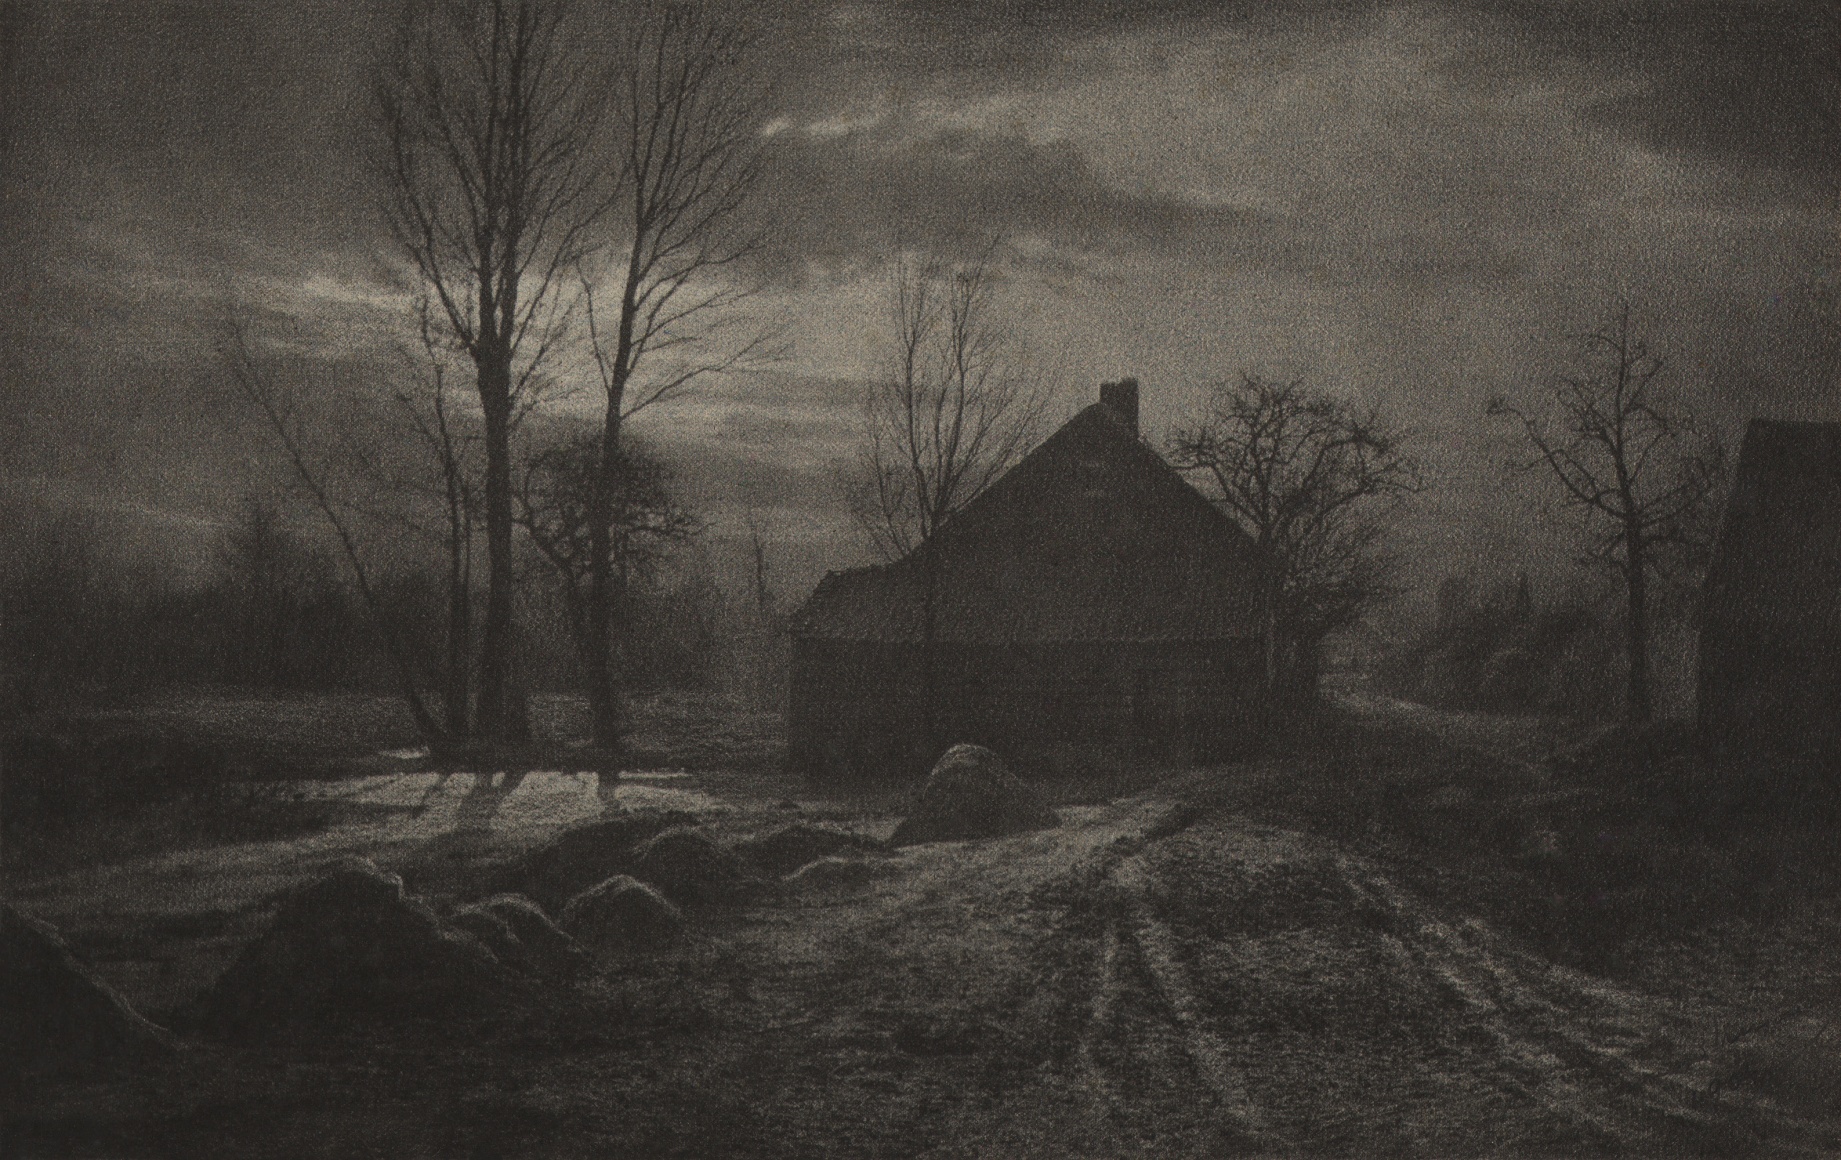 18. L&eacute;onard Misonne, Coucher de soleil, c. 1901. Rural landscape with small mounds, sparse trees, and a house or barn at sunset.